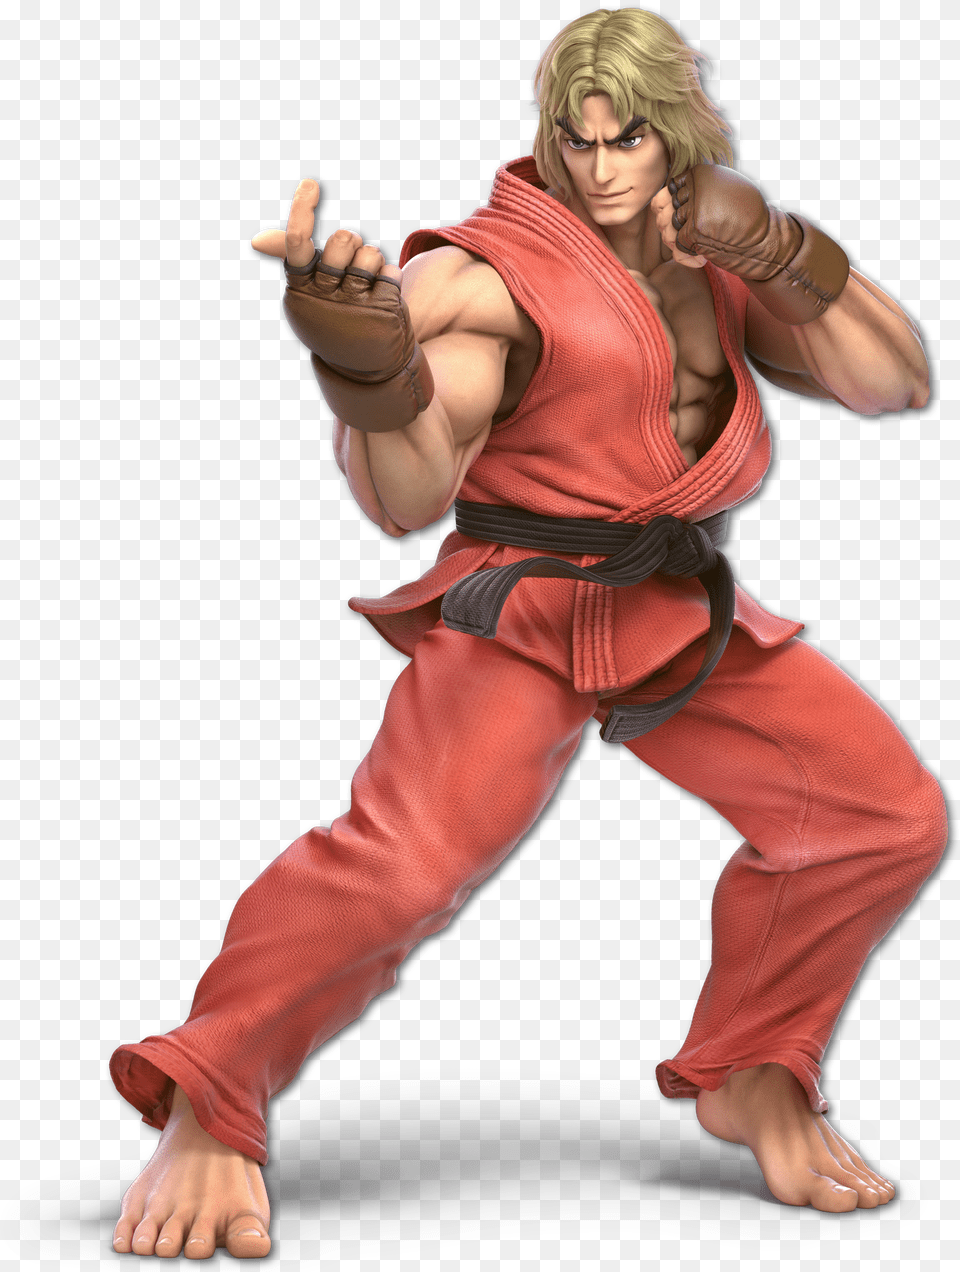 A Blond Haired Man Wearing An Orange Martial Arts Uniform Super Smash Bros Ultimate Ken Render, Adult, Person, Woman, Female Png Image